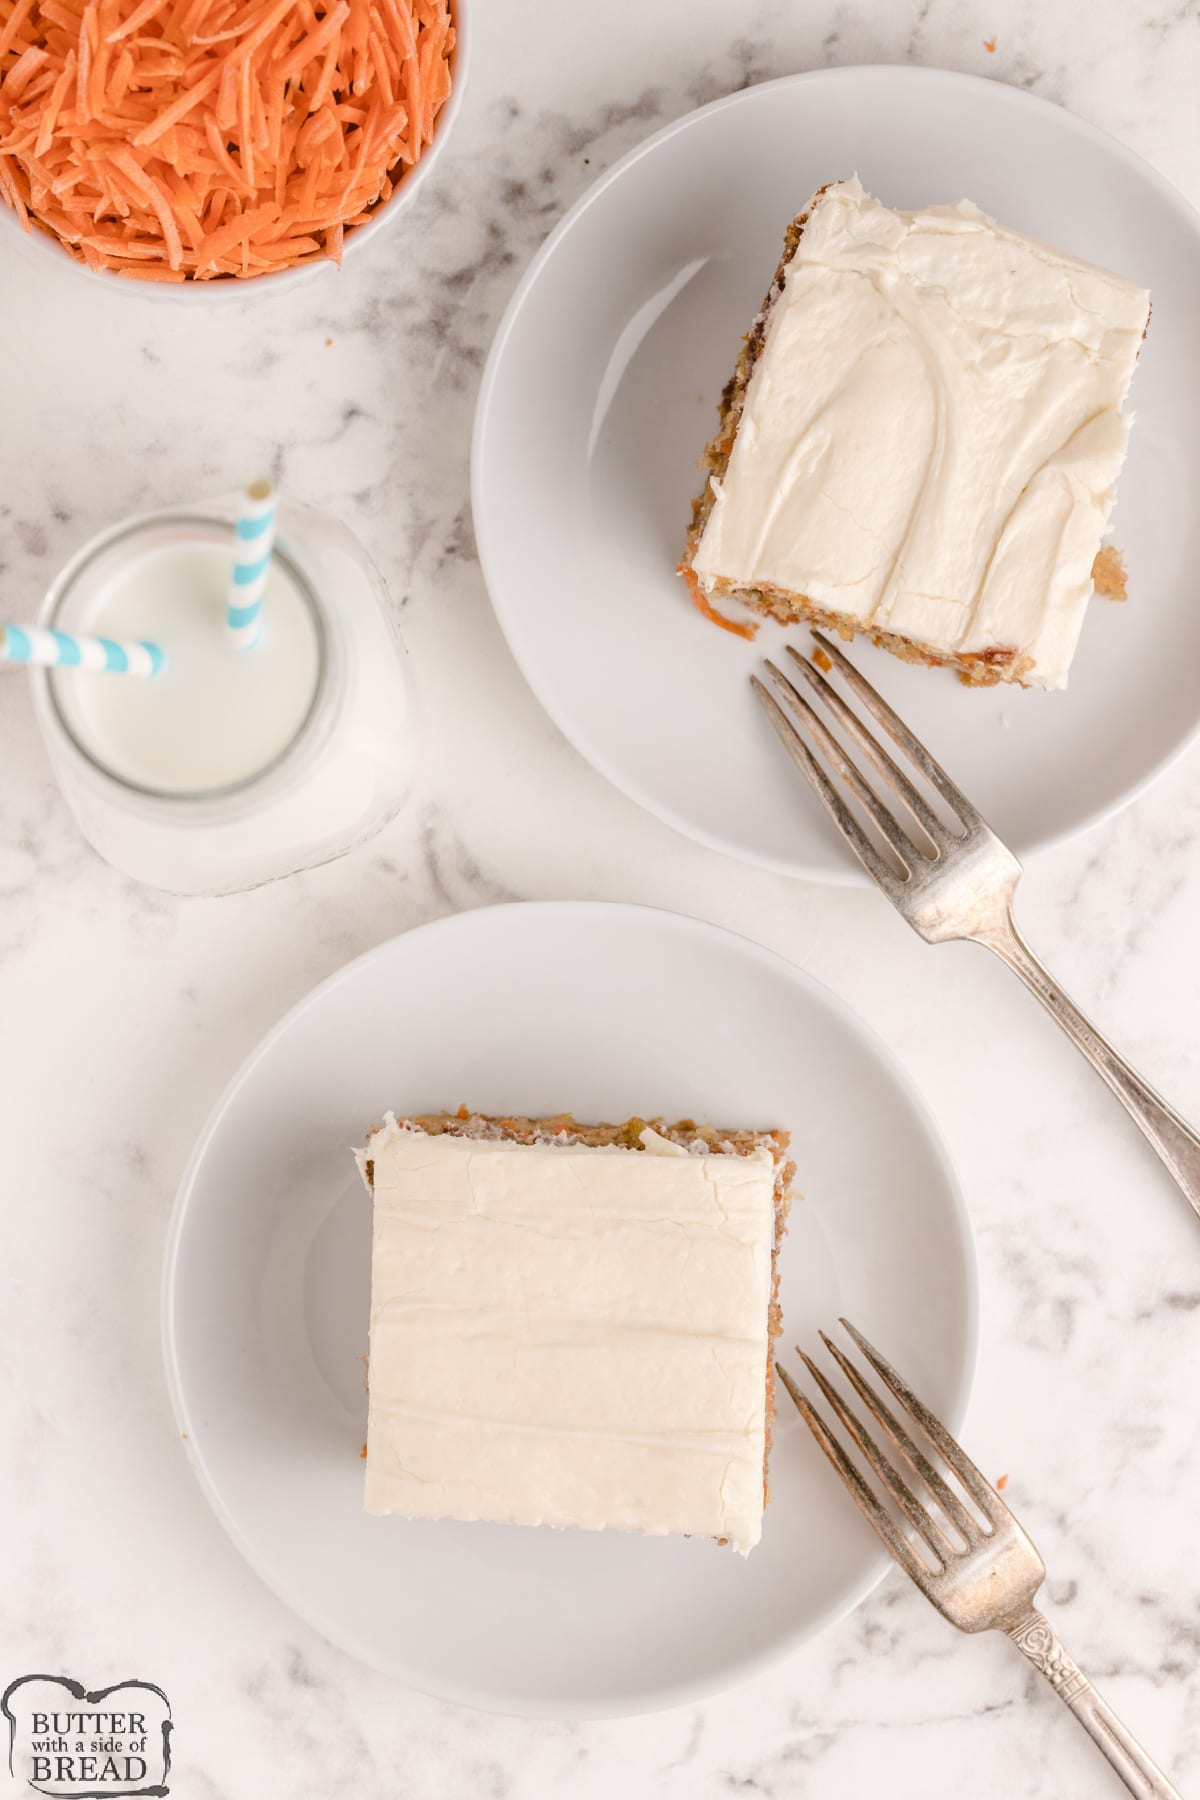 Slices of carrot cake with cream cheese frosting